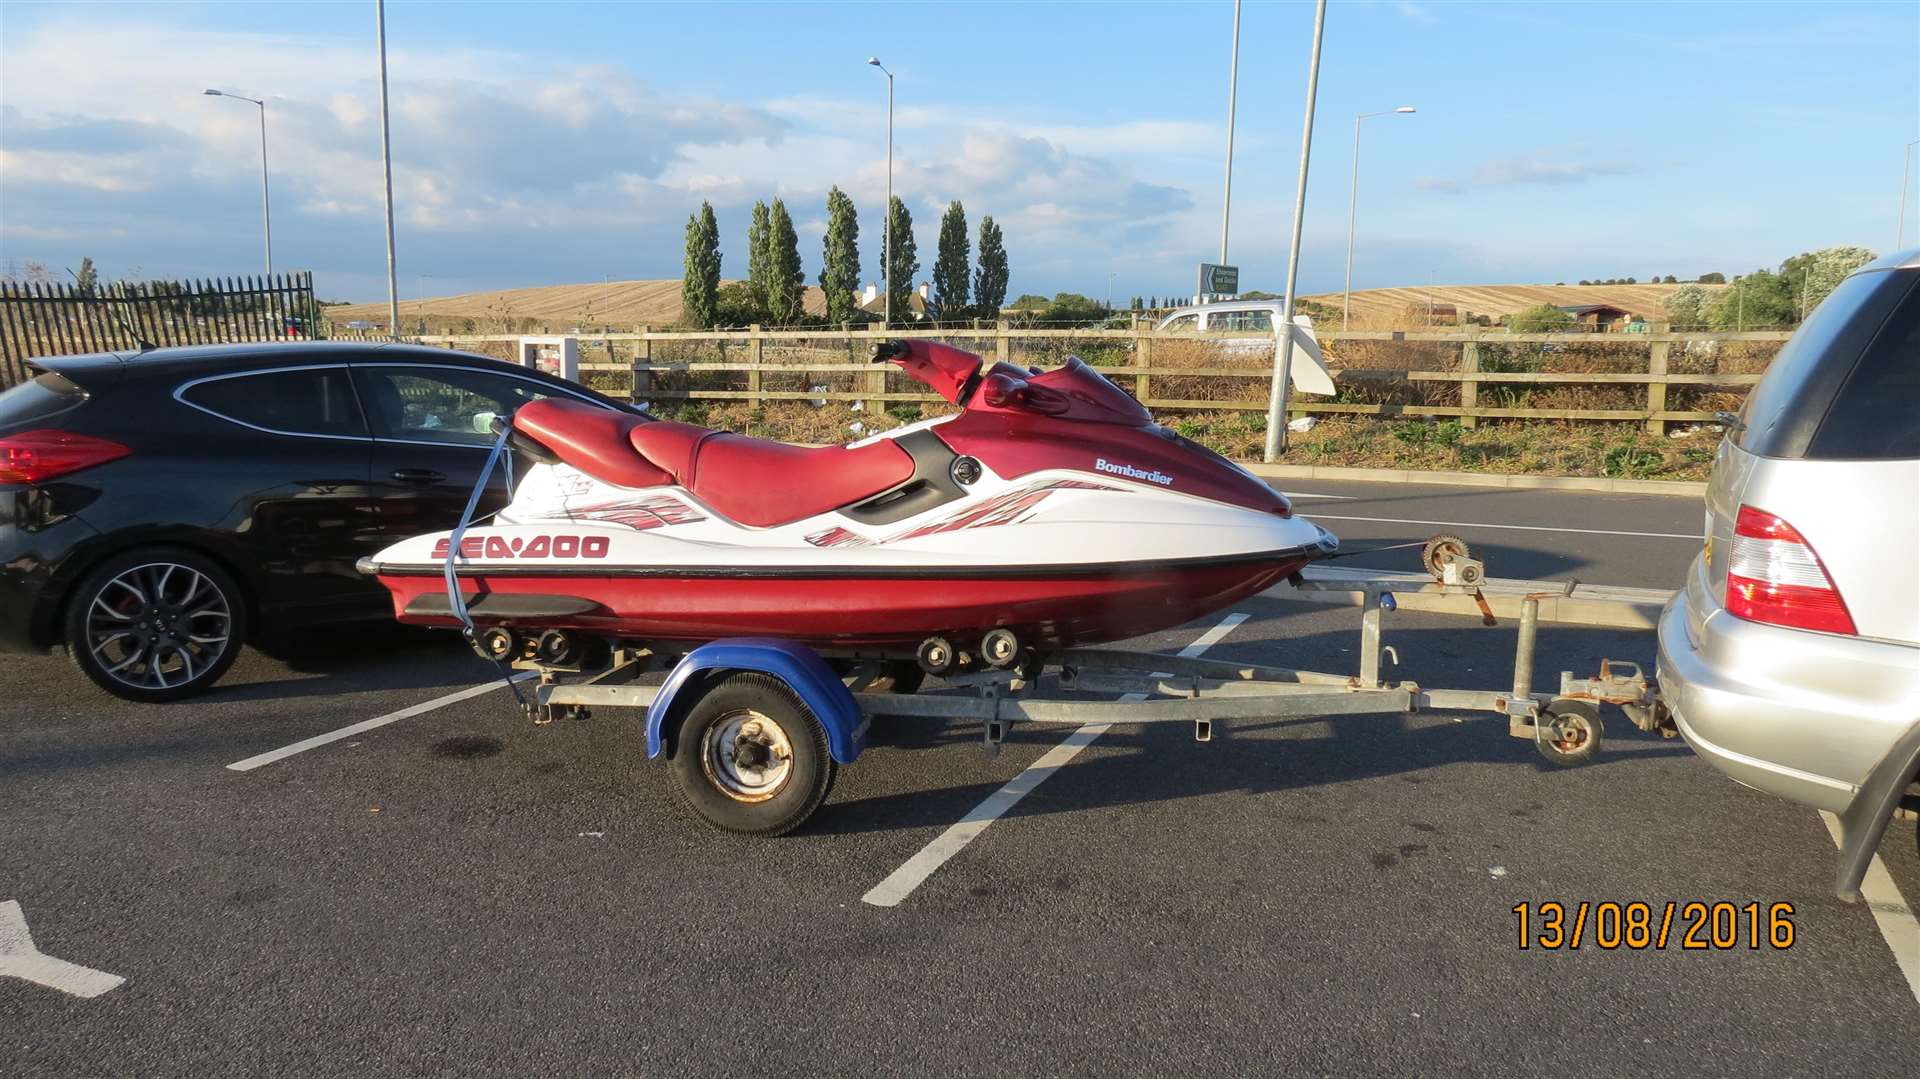 The jet ski purchased for use in the smuggling attempts. Picture: NCA